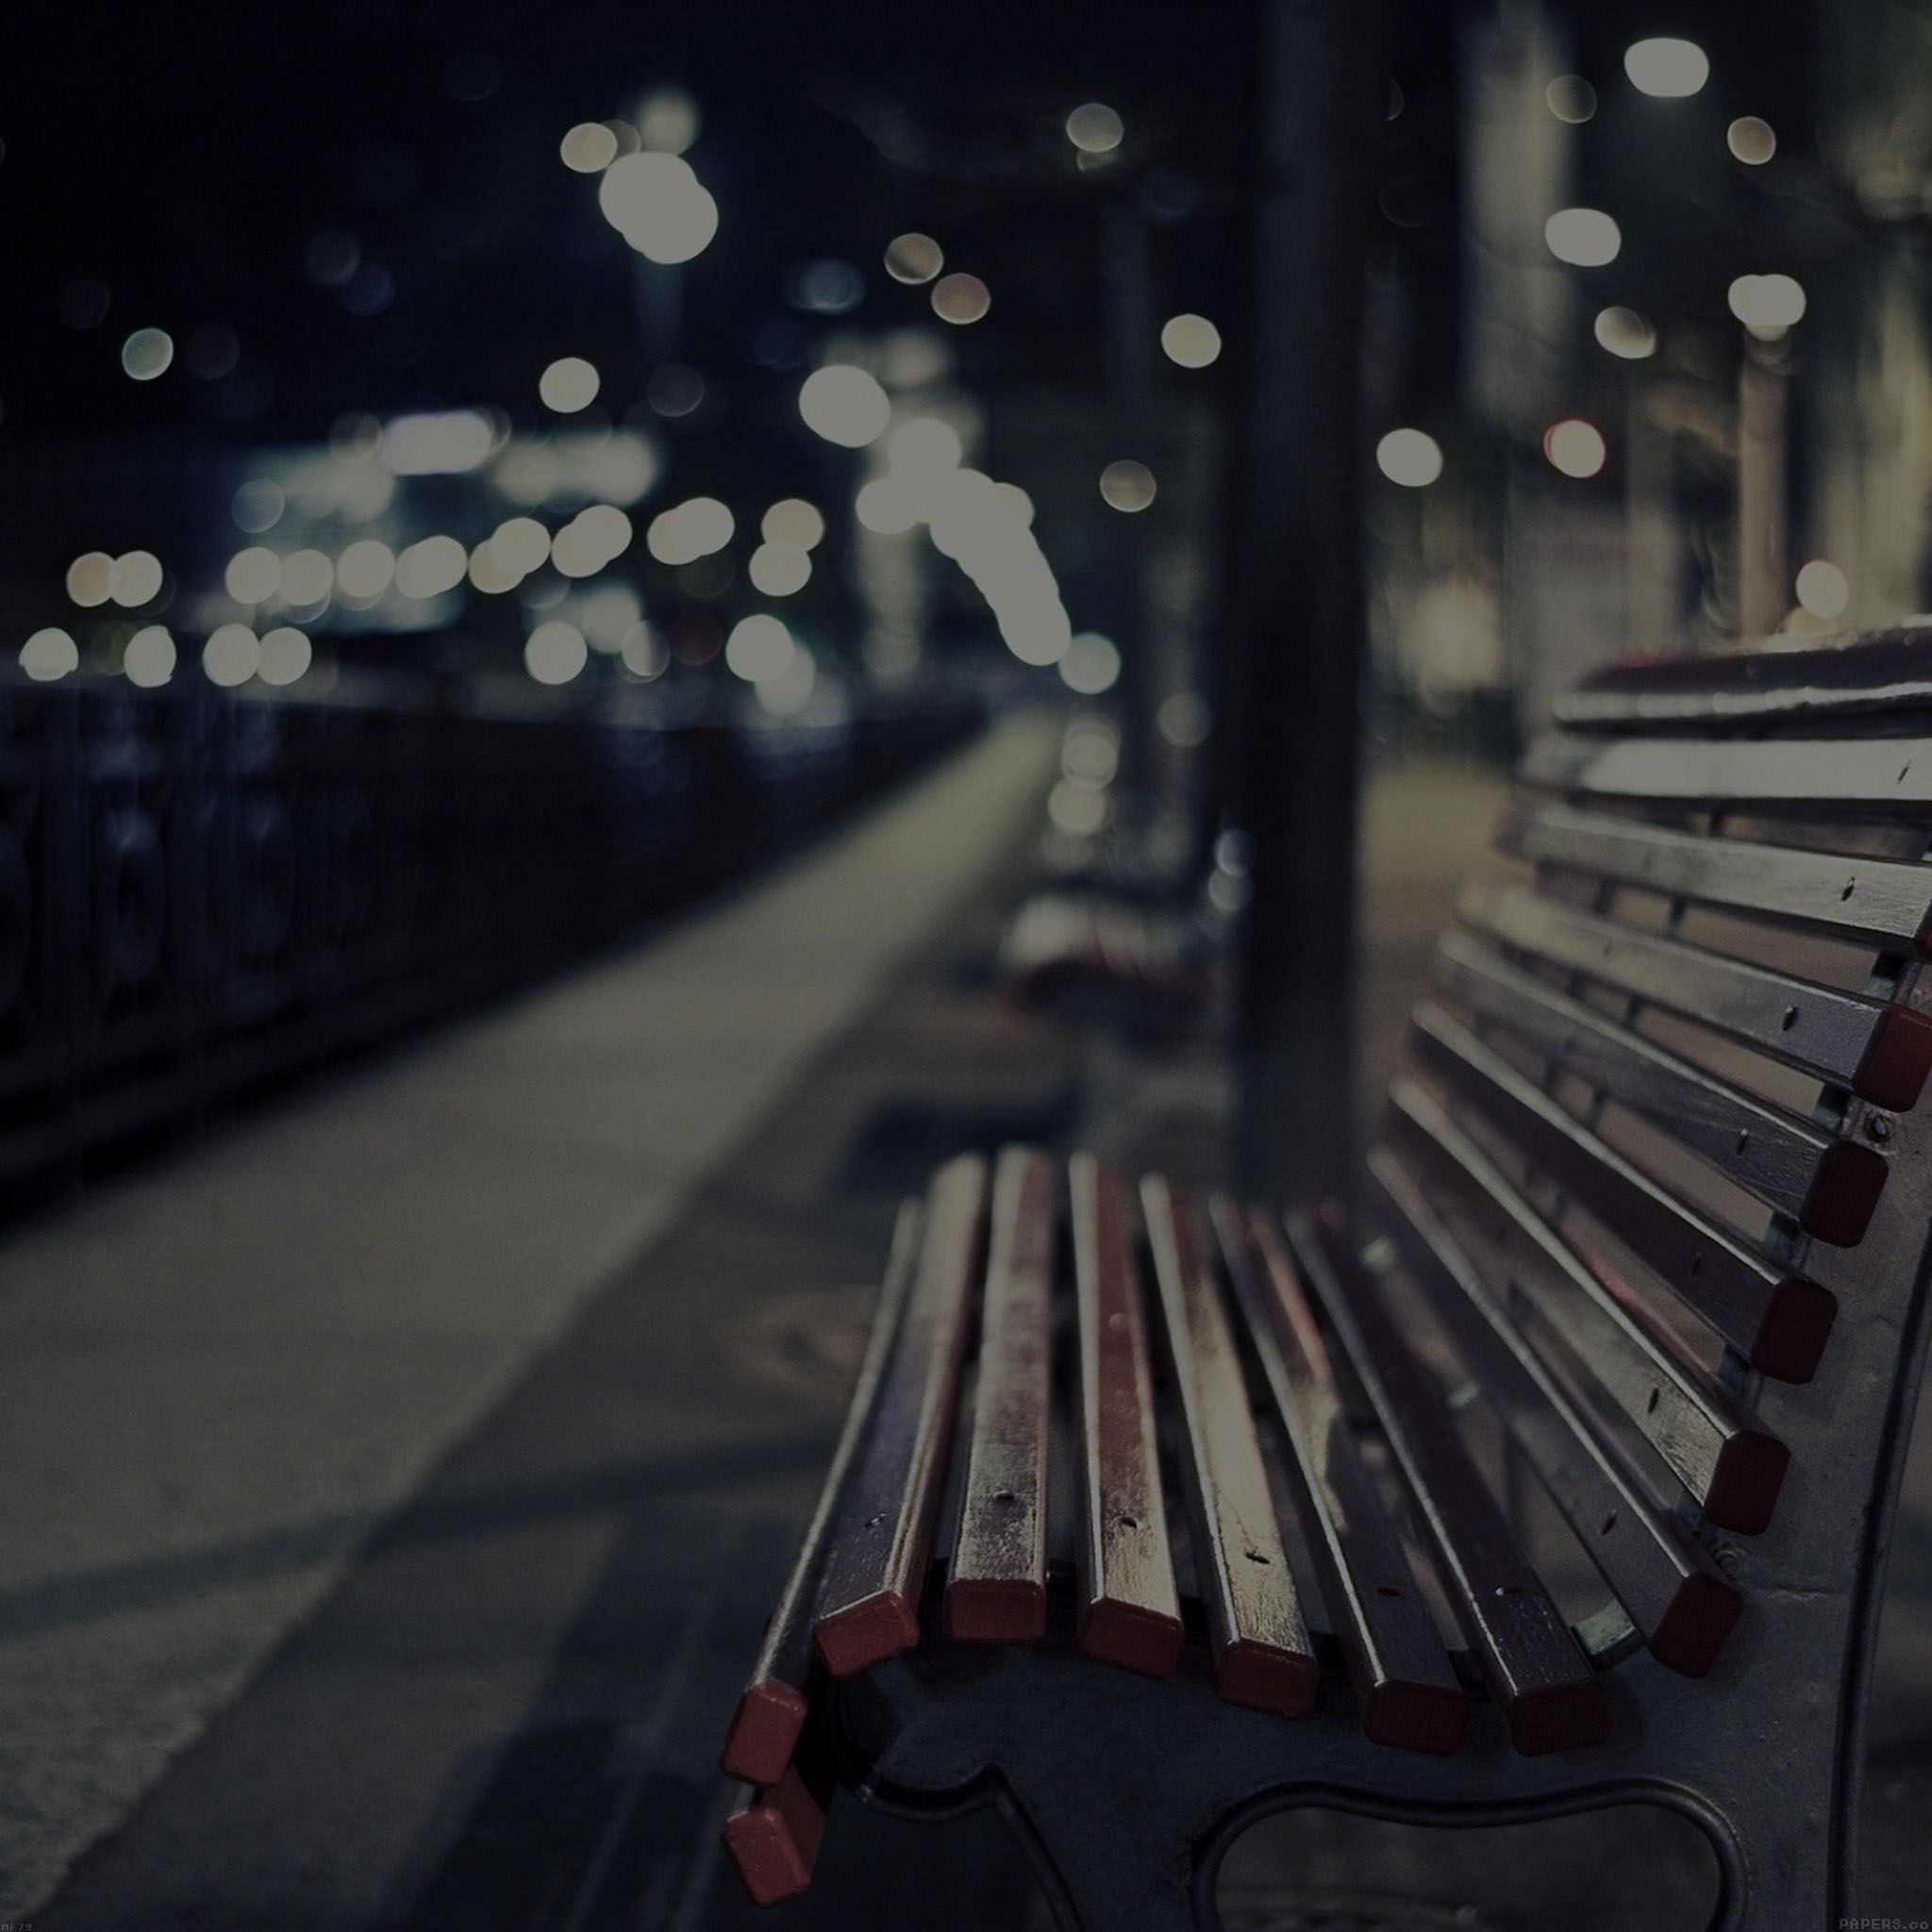 A wooden bench on the street - Night